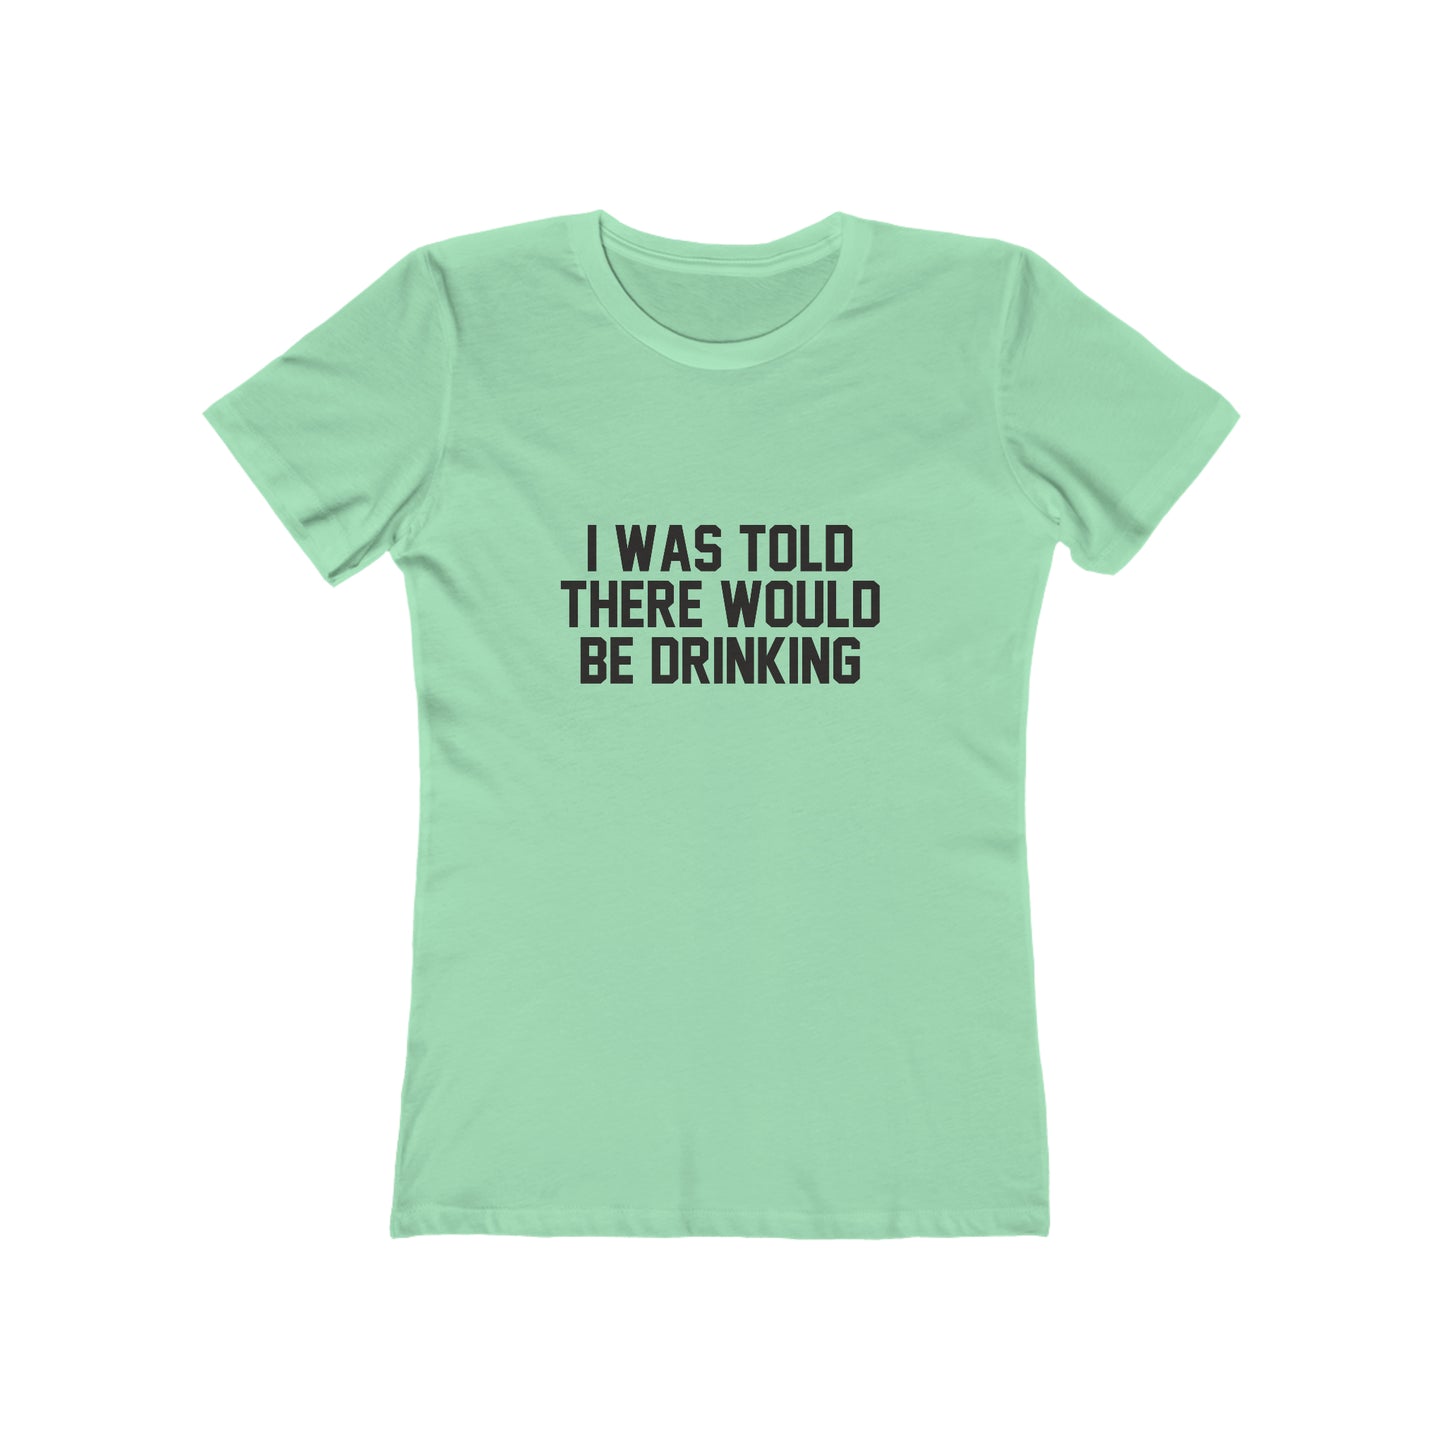 I Was Told There Would be Drinking - Women's T-shirt